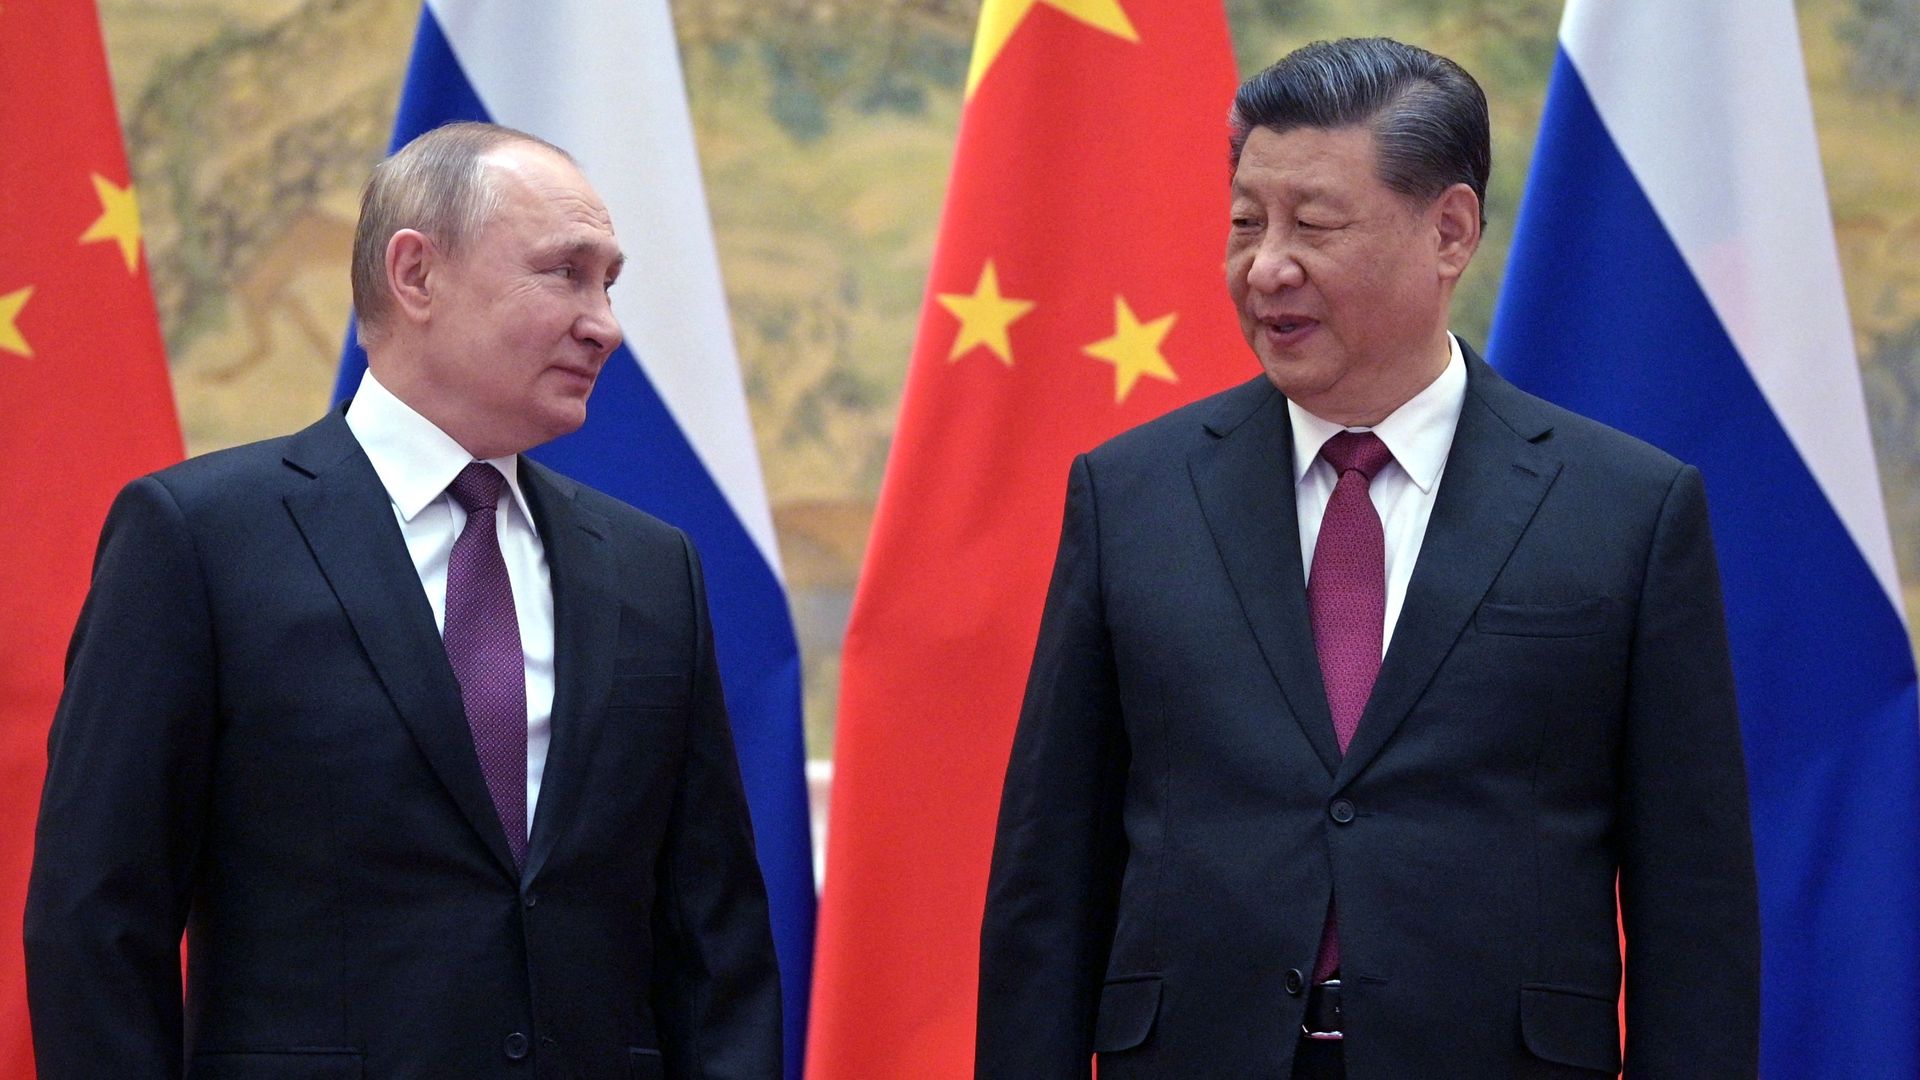 Russian President Vladimir Putin (L) and Chinese President Xi Jinping pose for a photograph during their meeting in Beijing, on February 4.